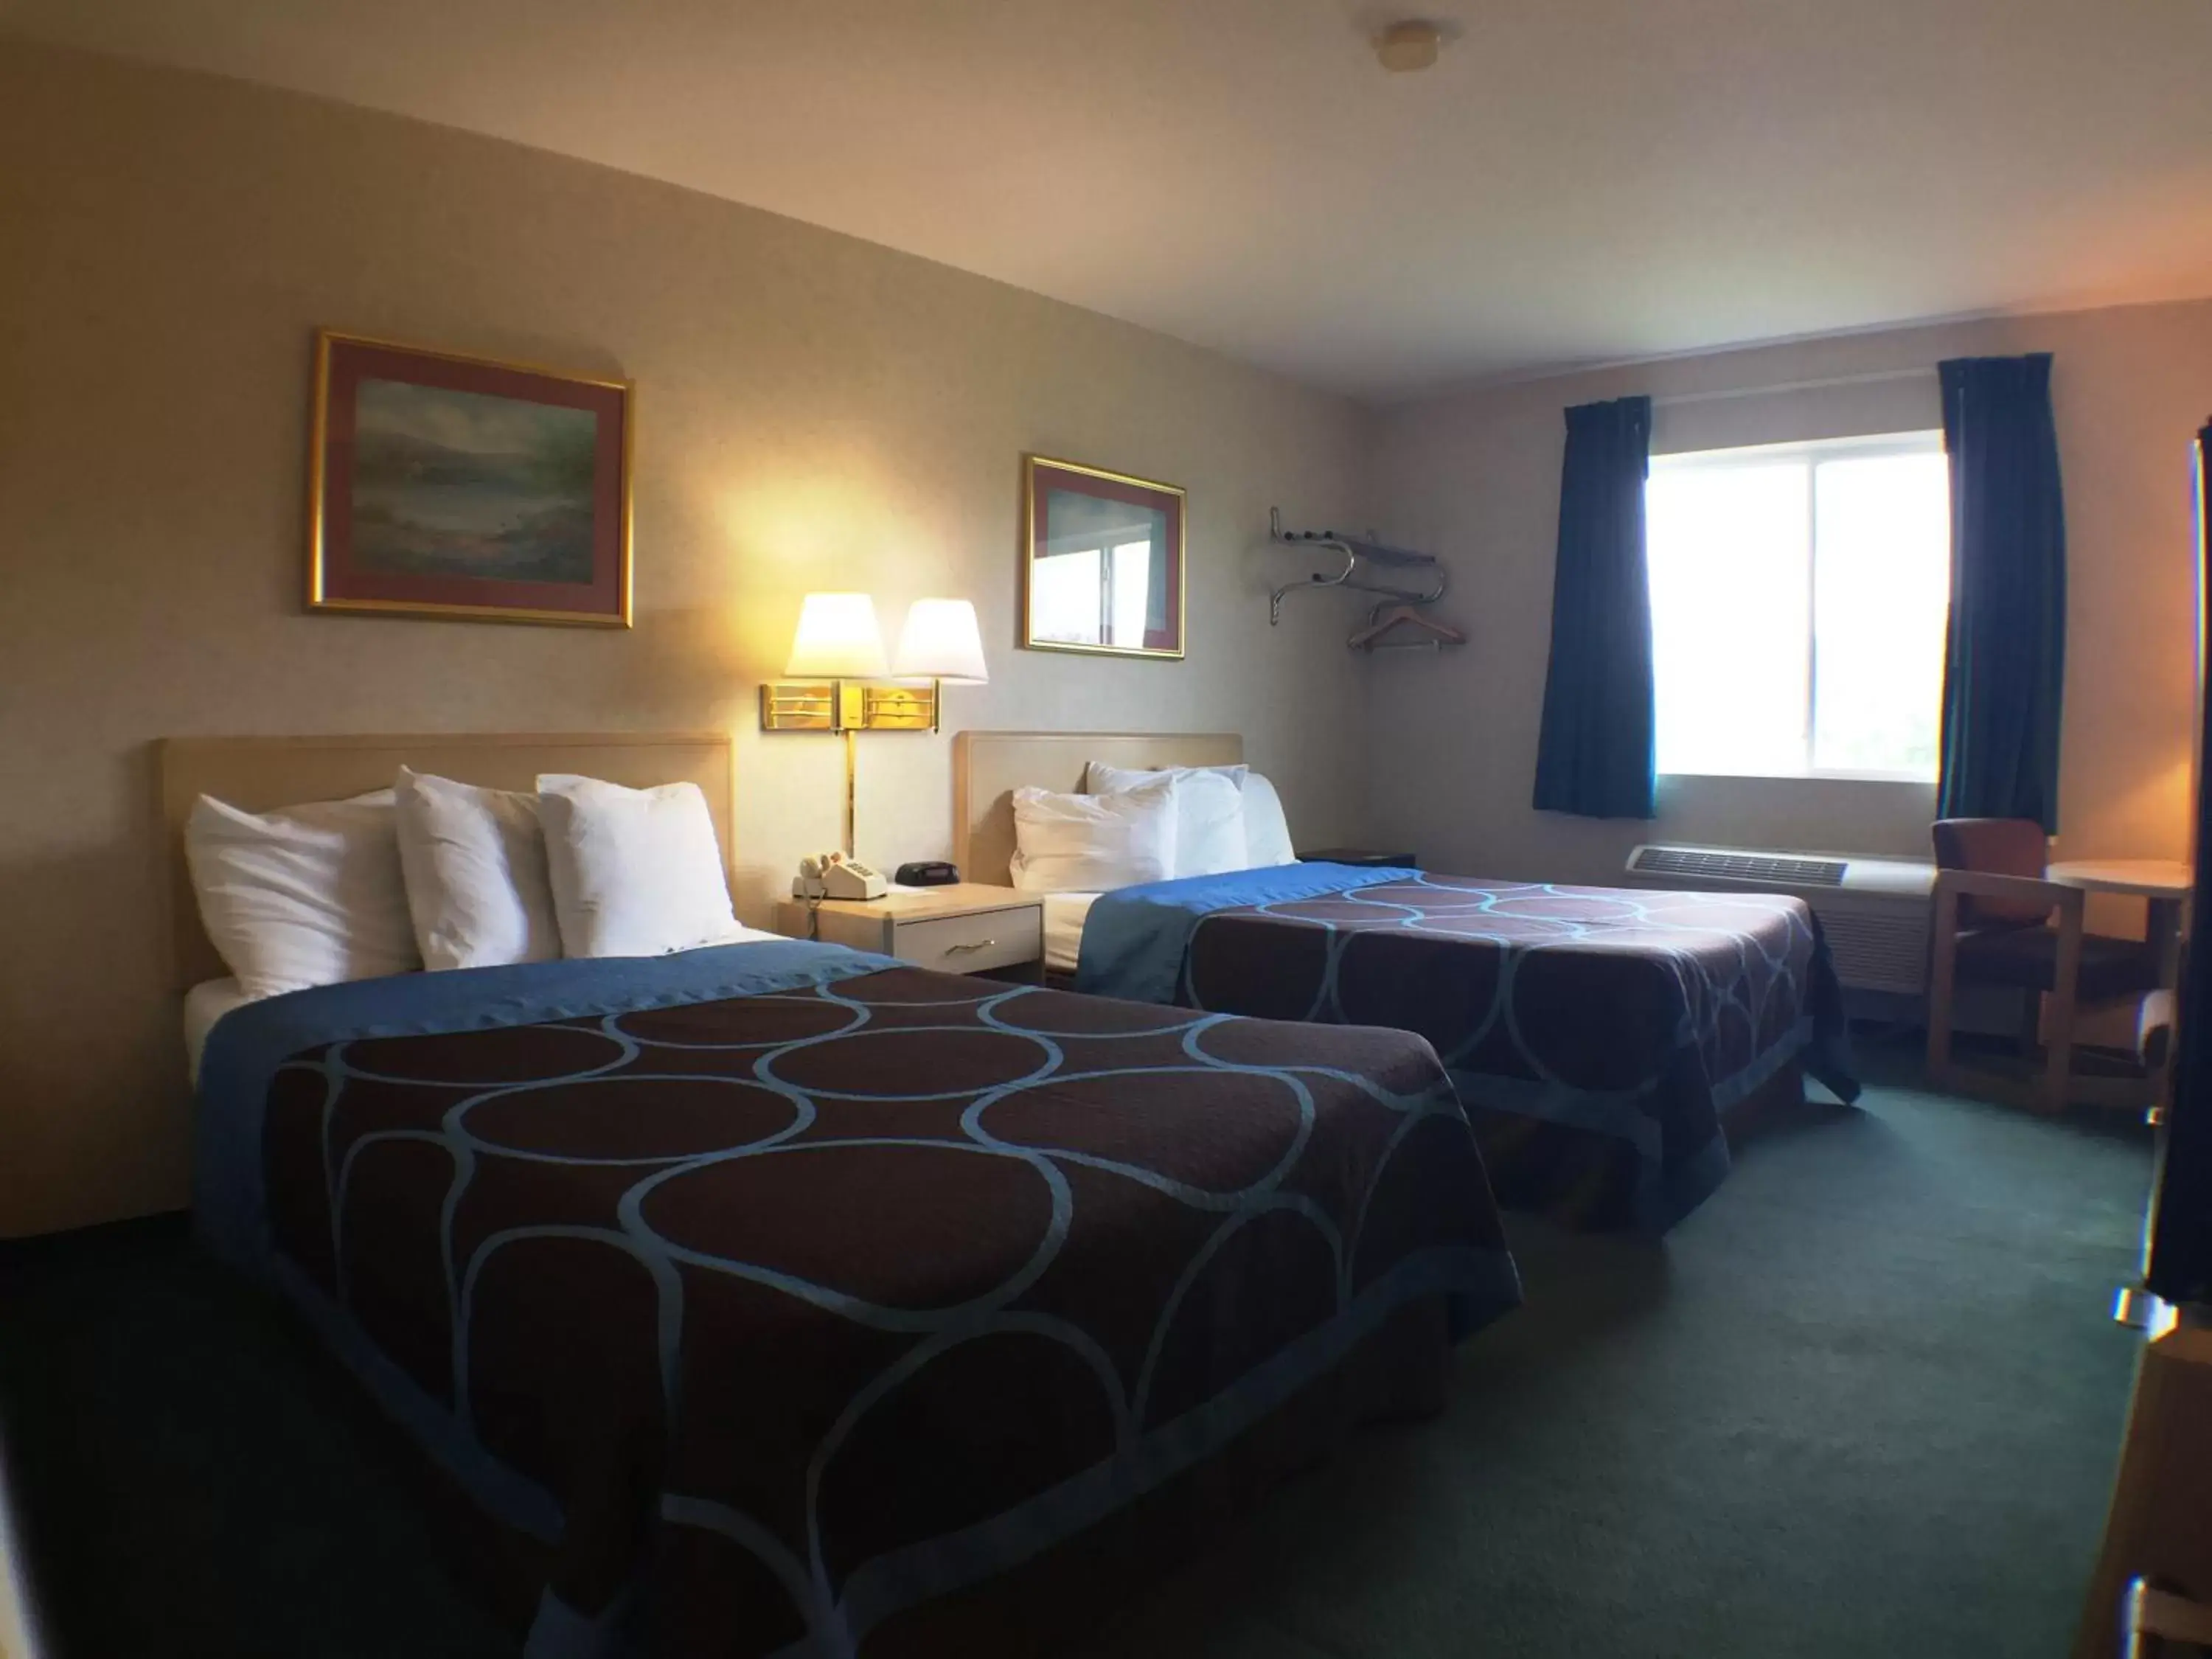 Bed, Room Photo in Super 8 by Wyndham Canandaigua